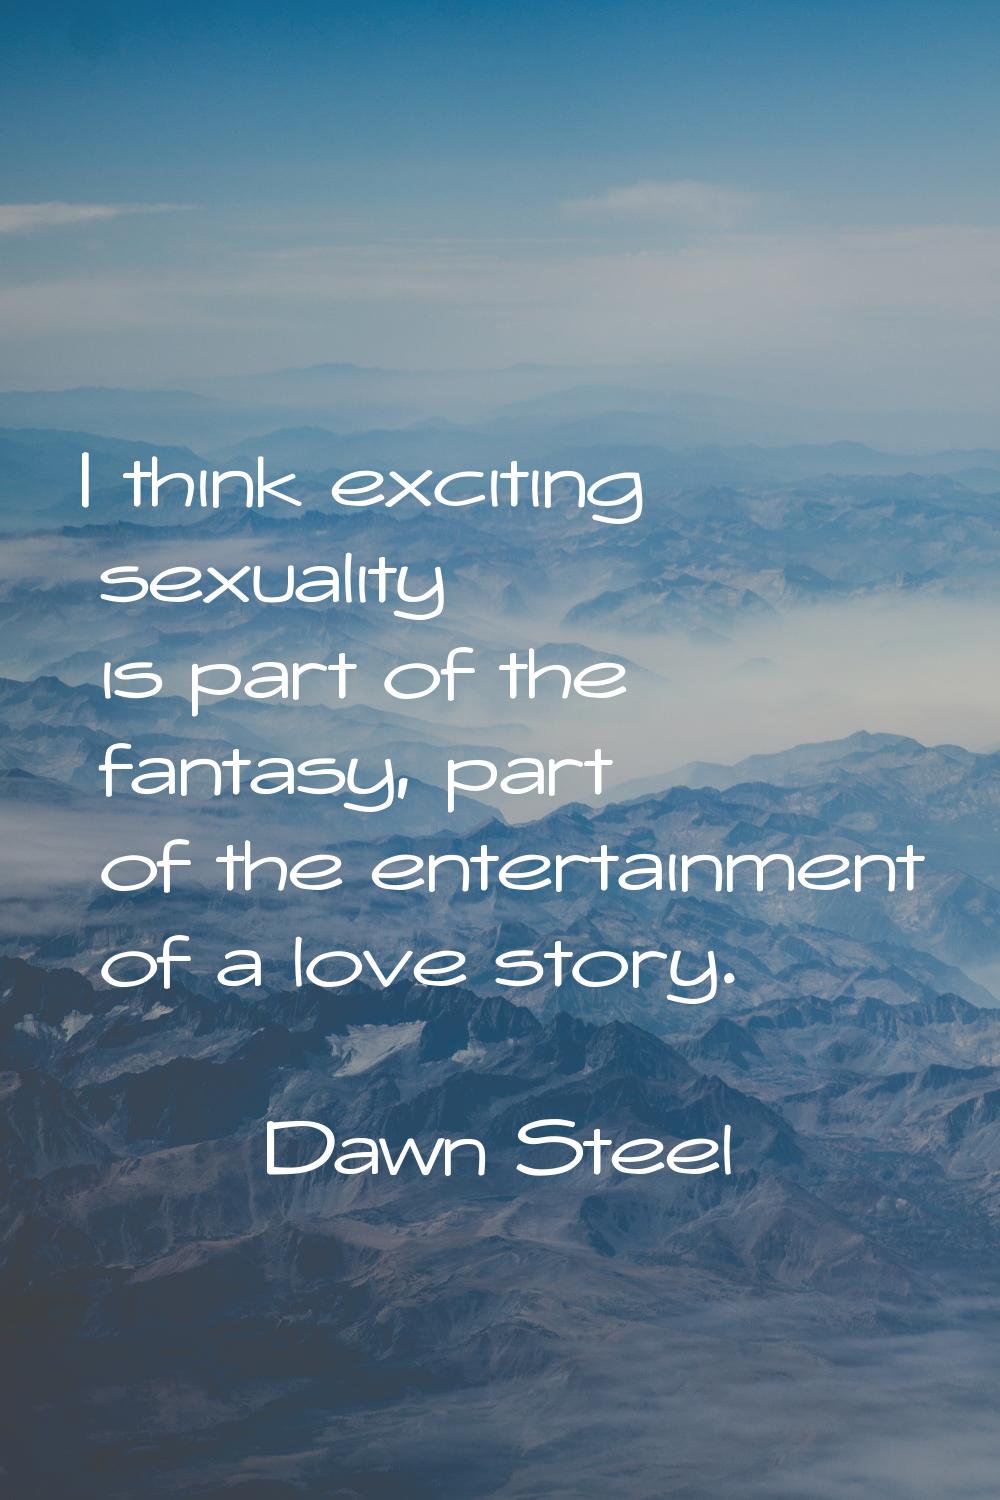 I think exciting sexuality is part of the fantasy, part of the entertainment of a love story.